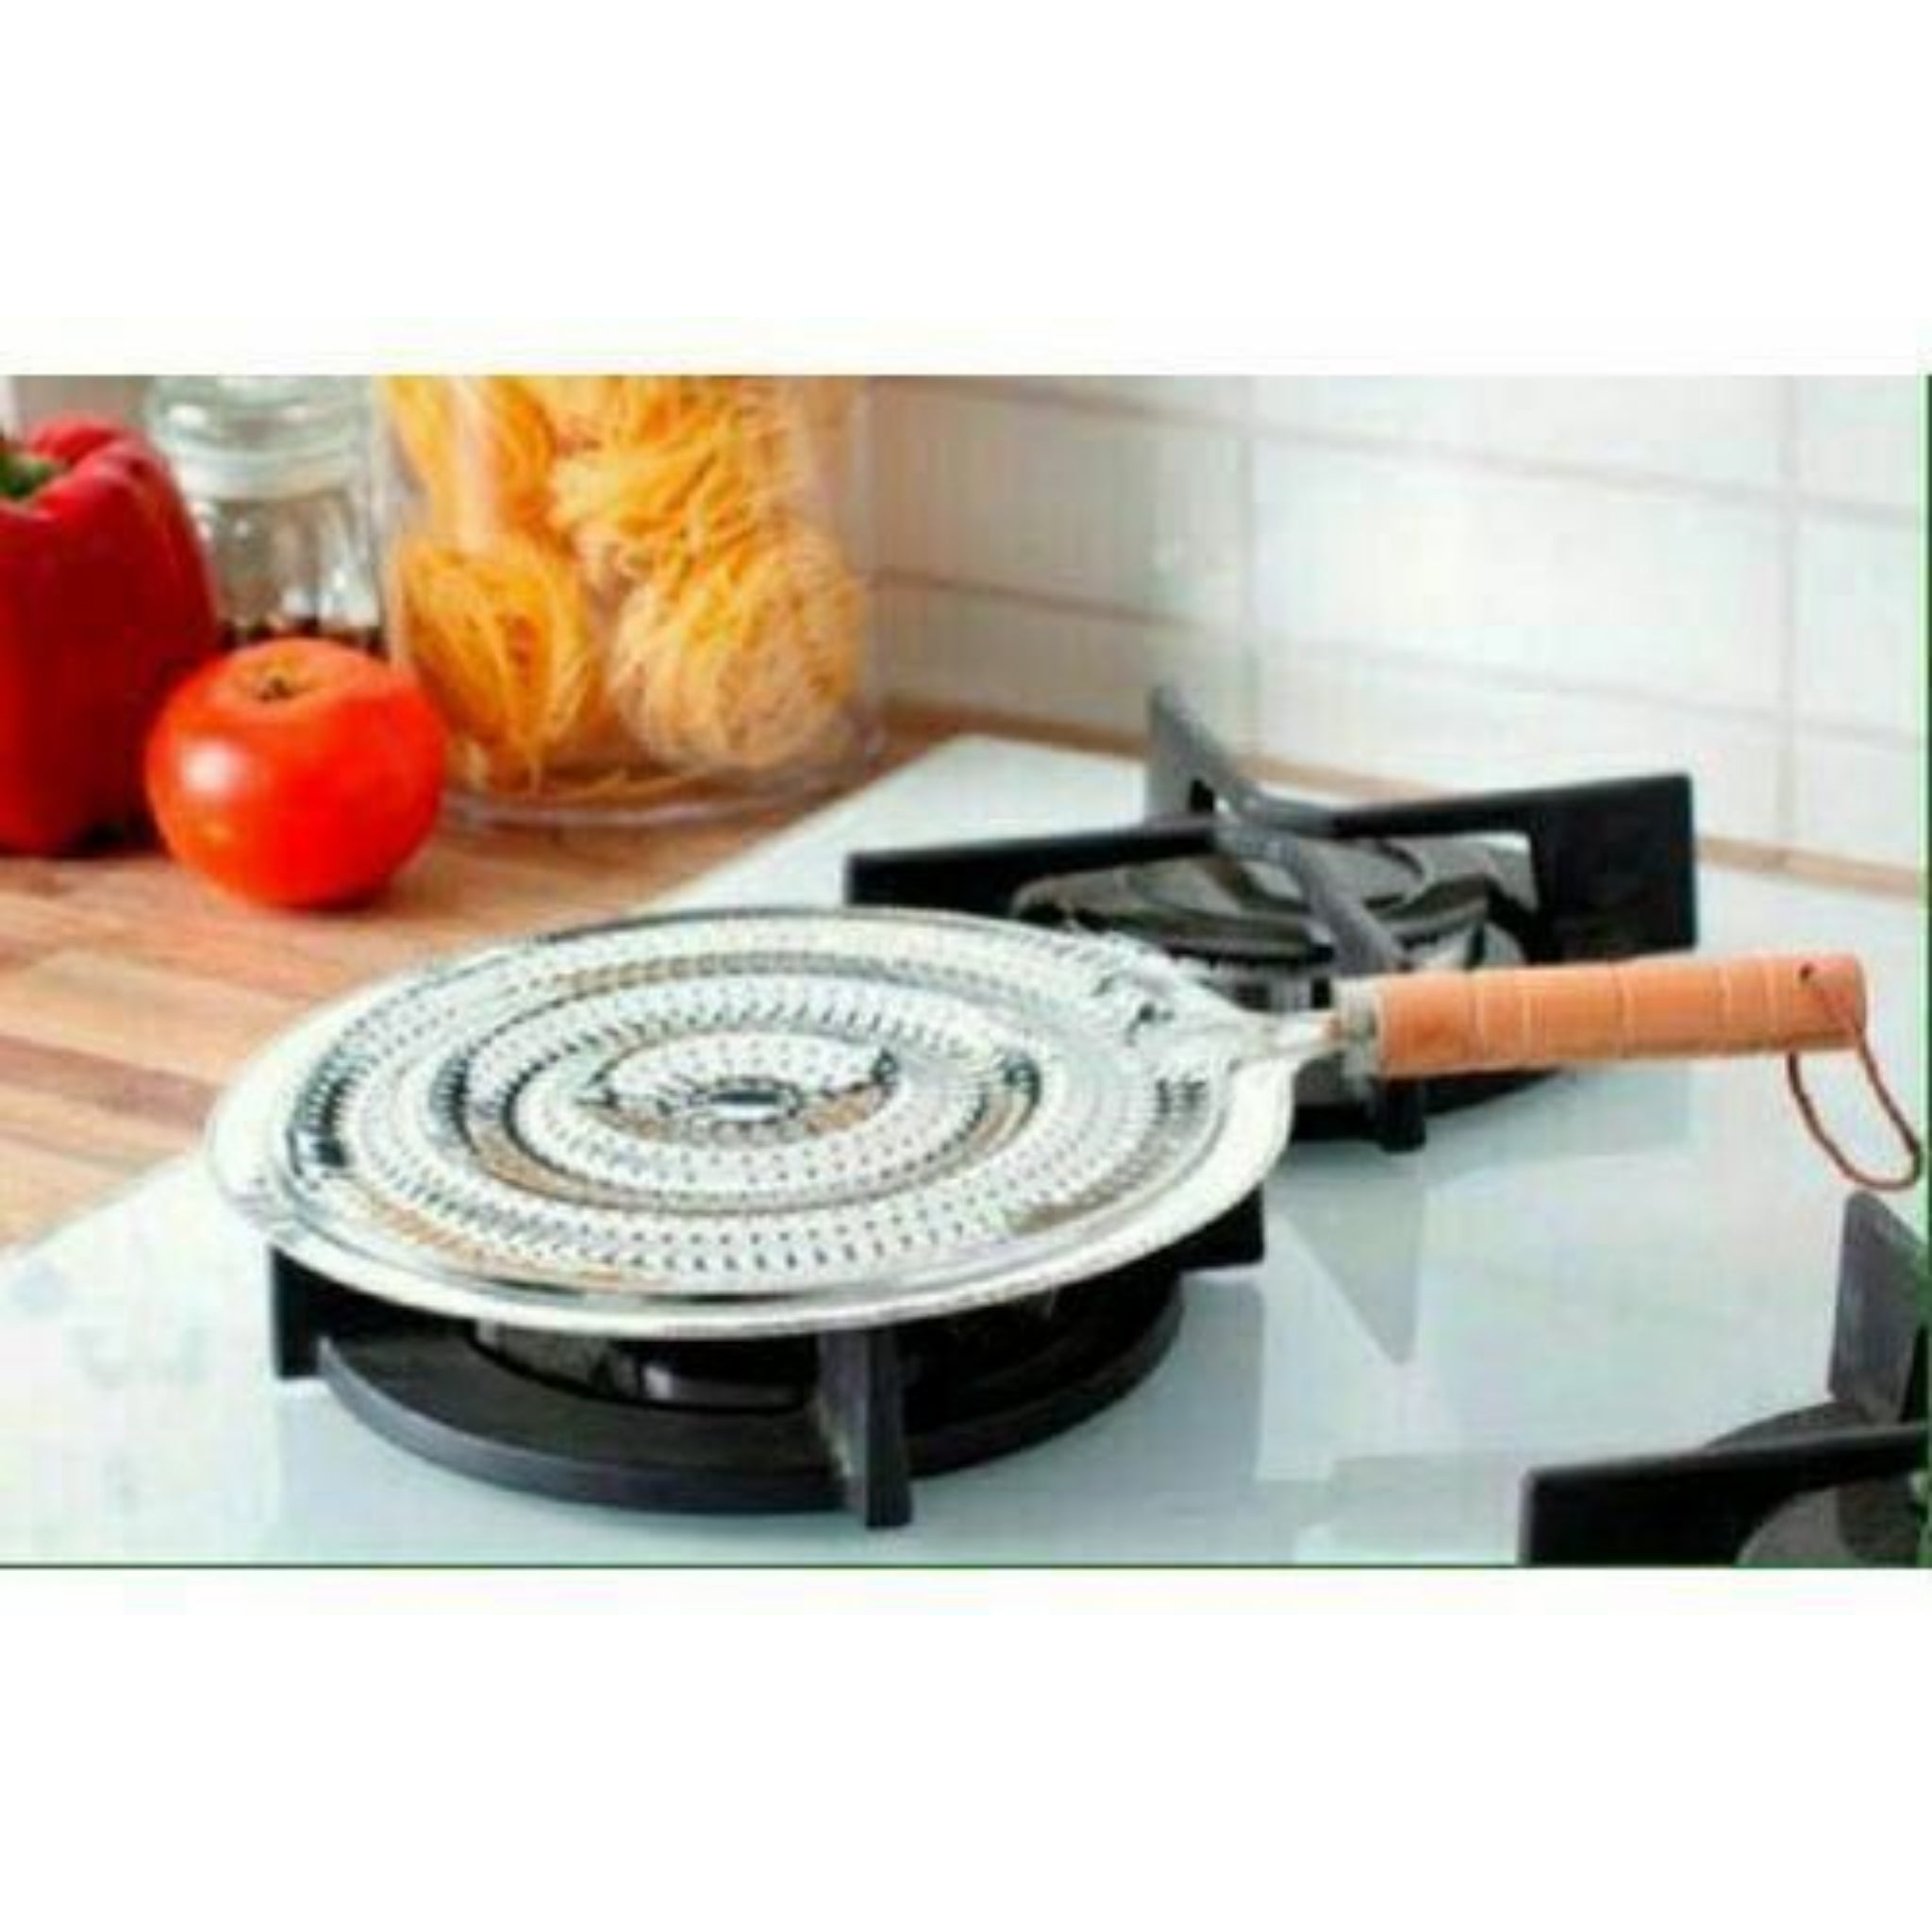 Beclen Harp 21cm Simmer Ring Heat Diffuser For Gas And Electric Cookers-Perfect Stove Mat Hob Tagine